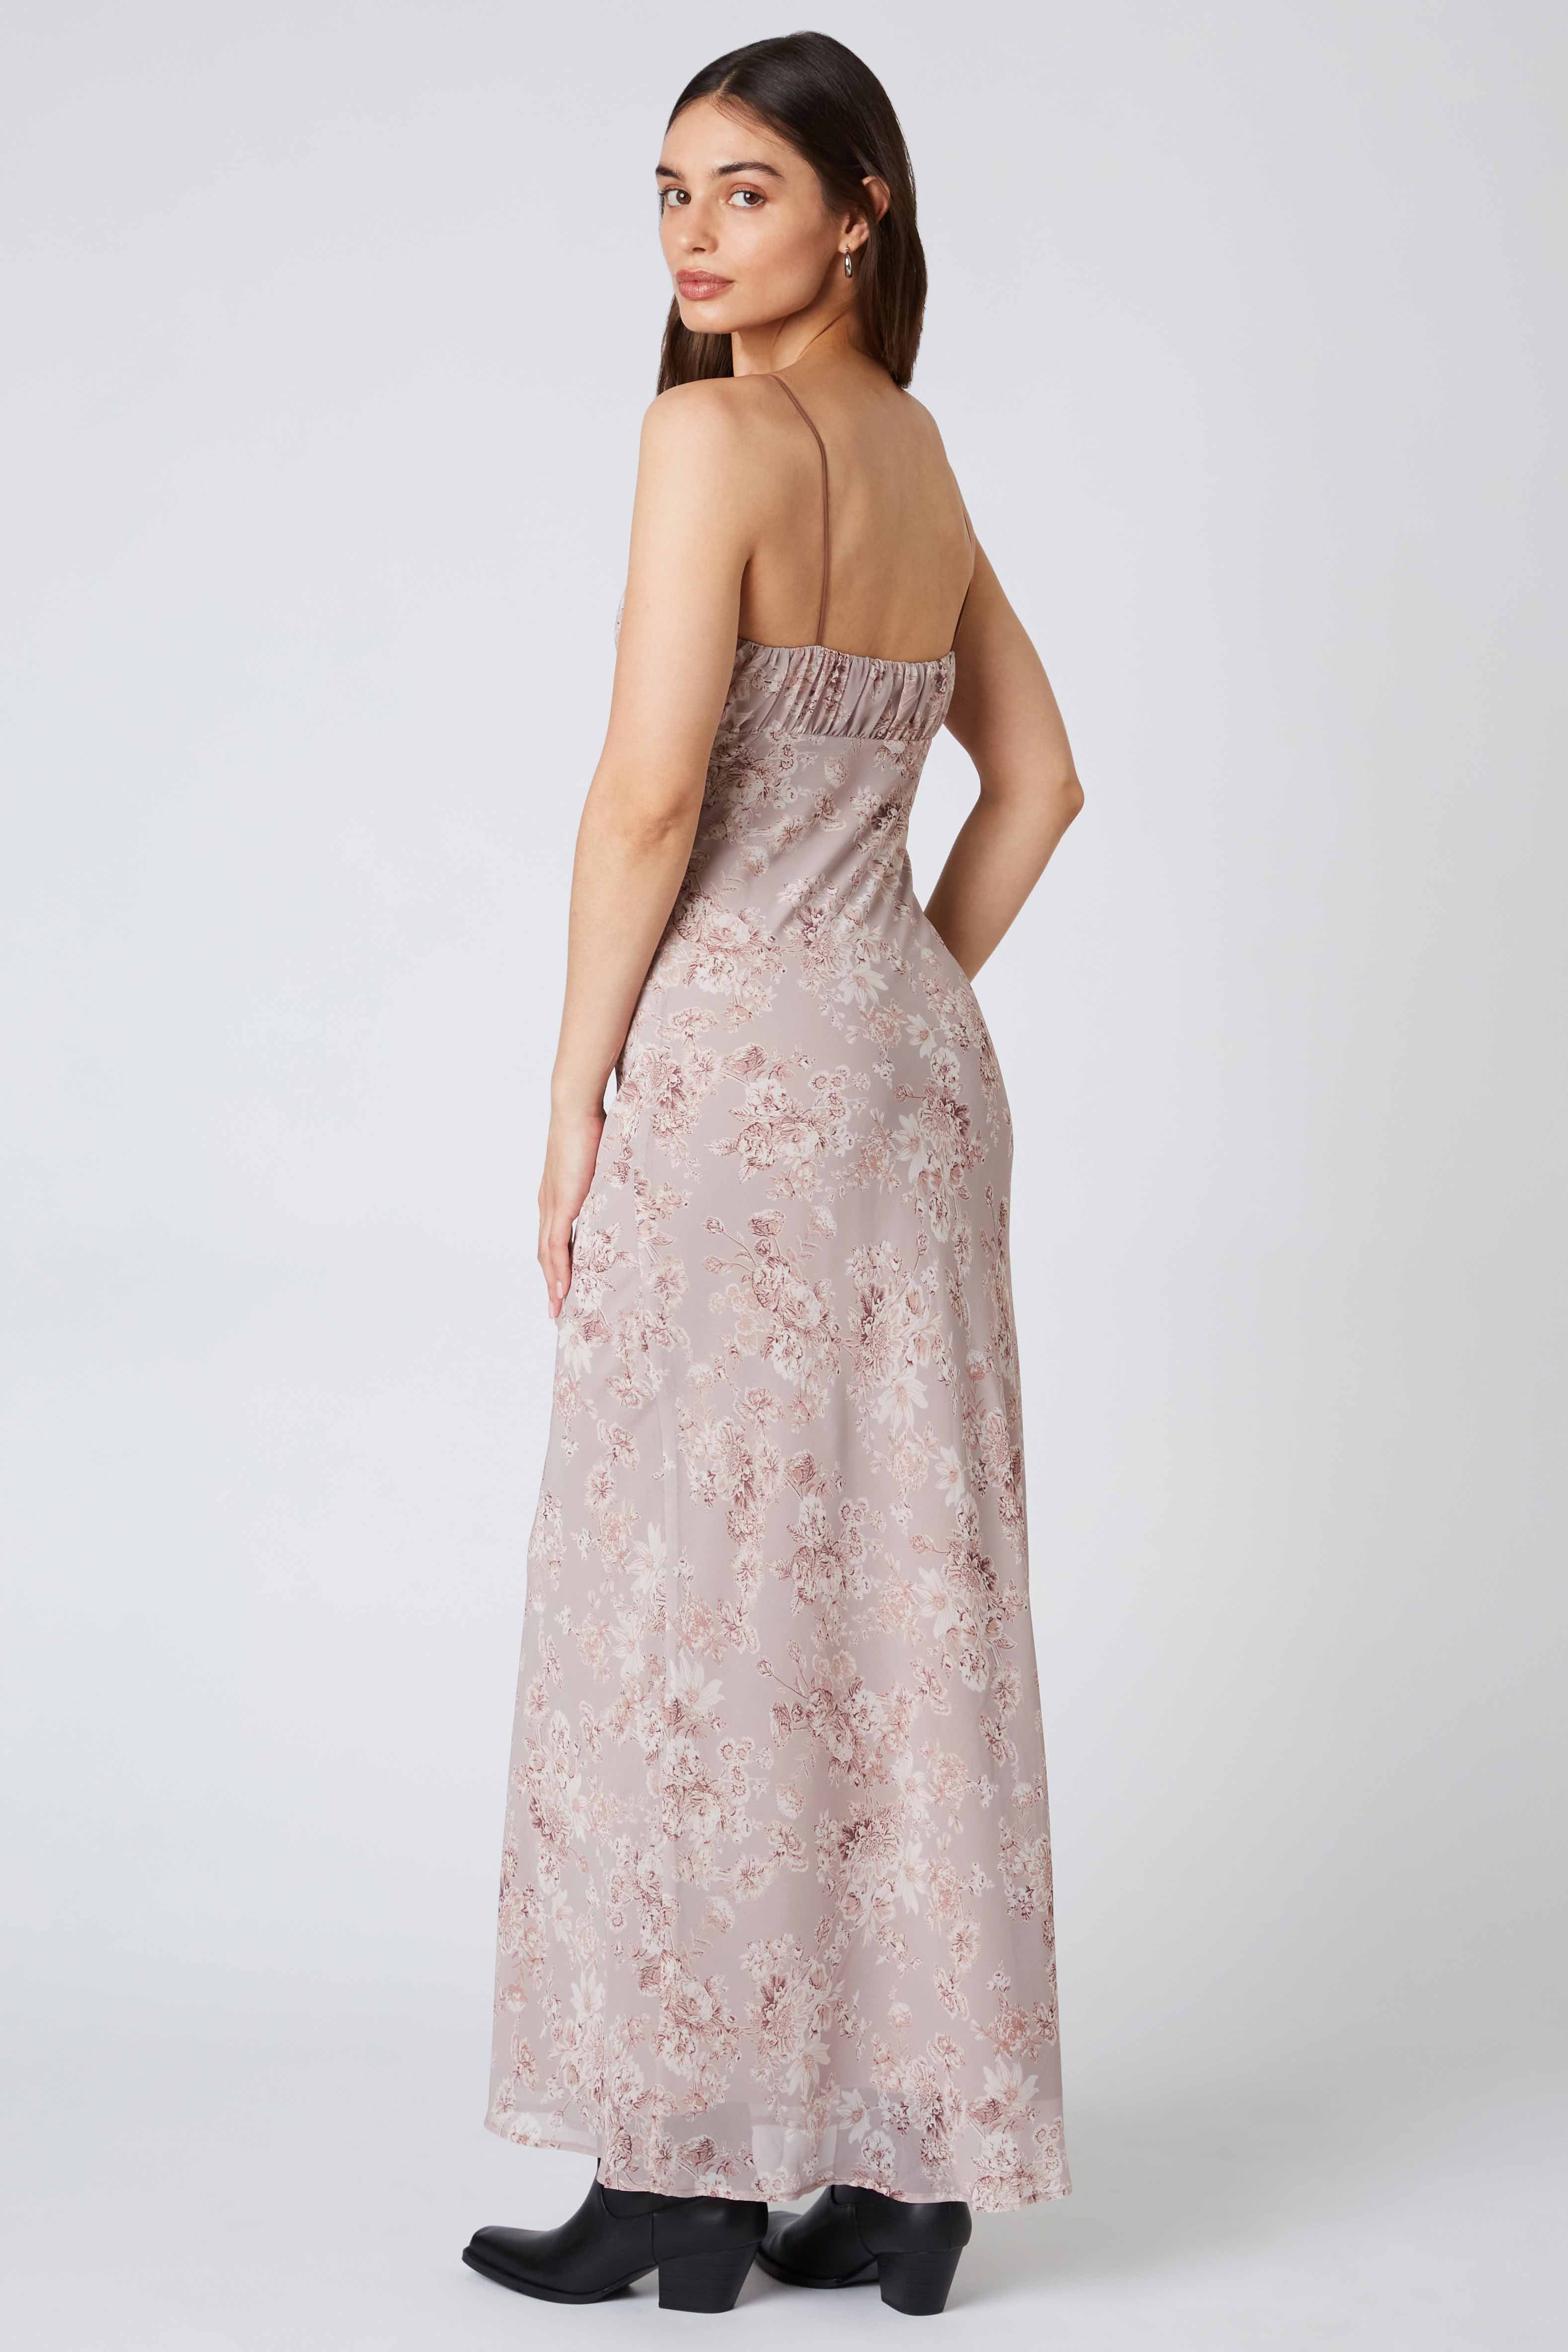 Floral Maxi Dress in Mocha Back View